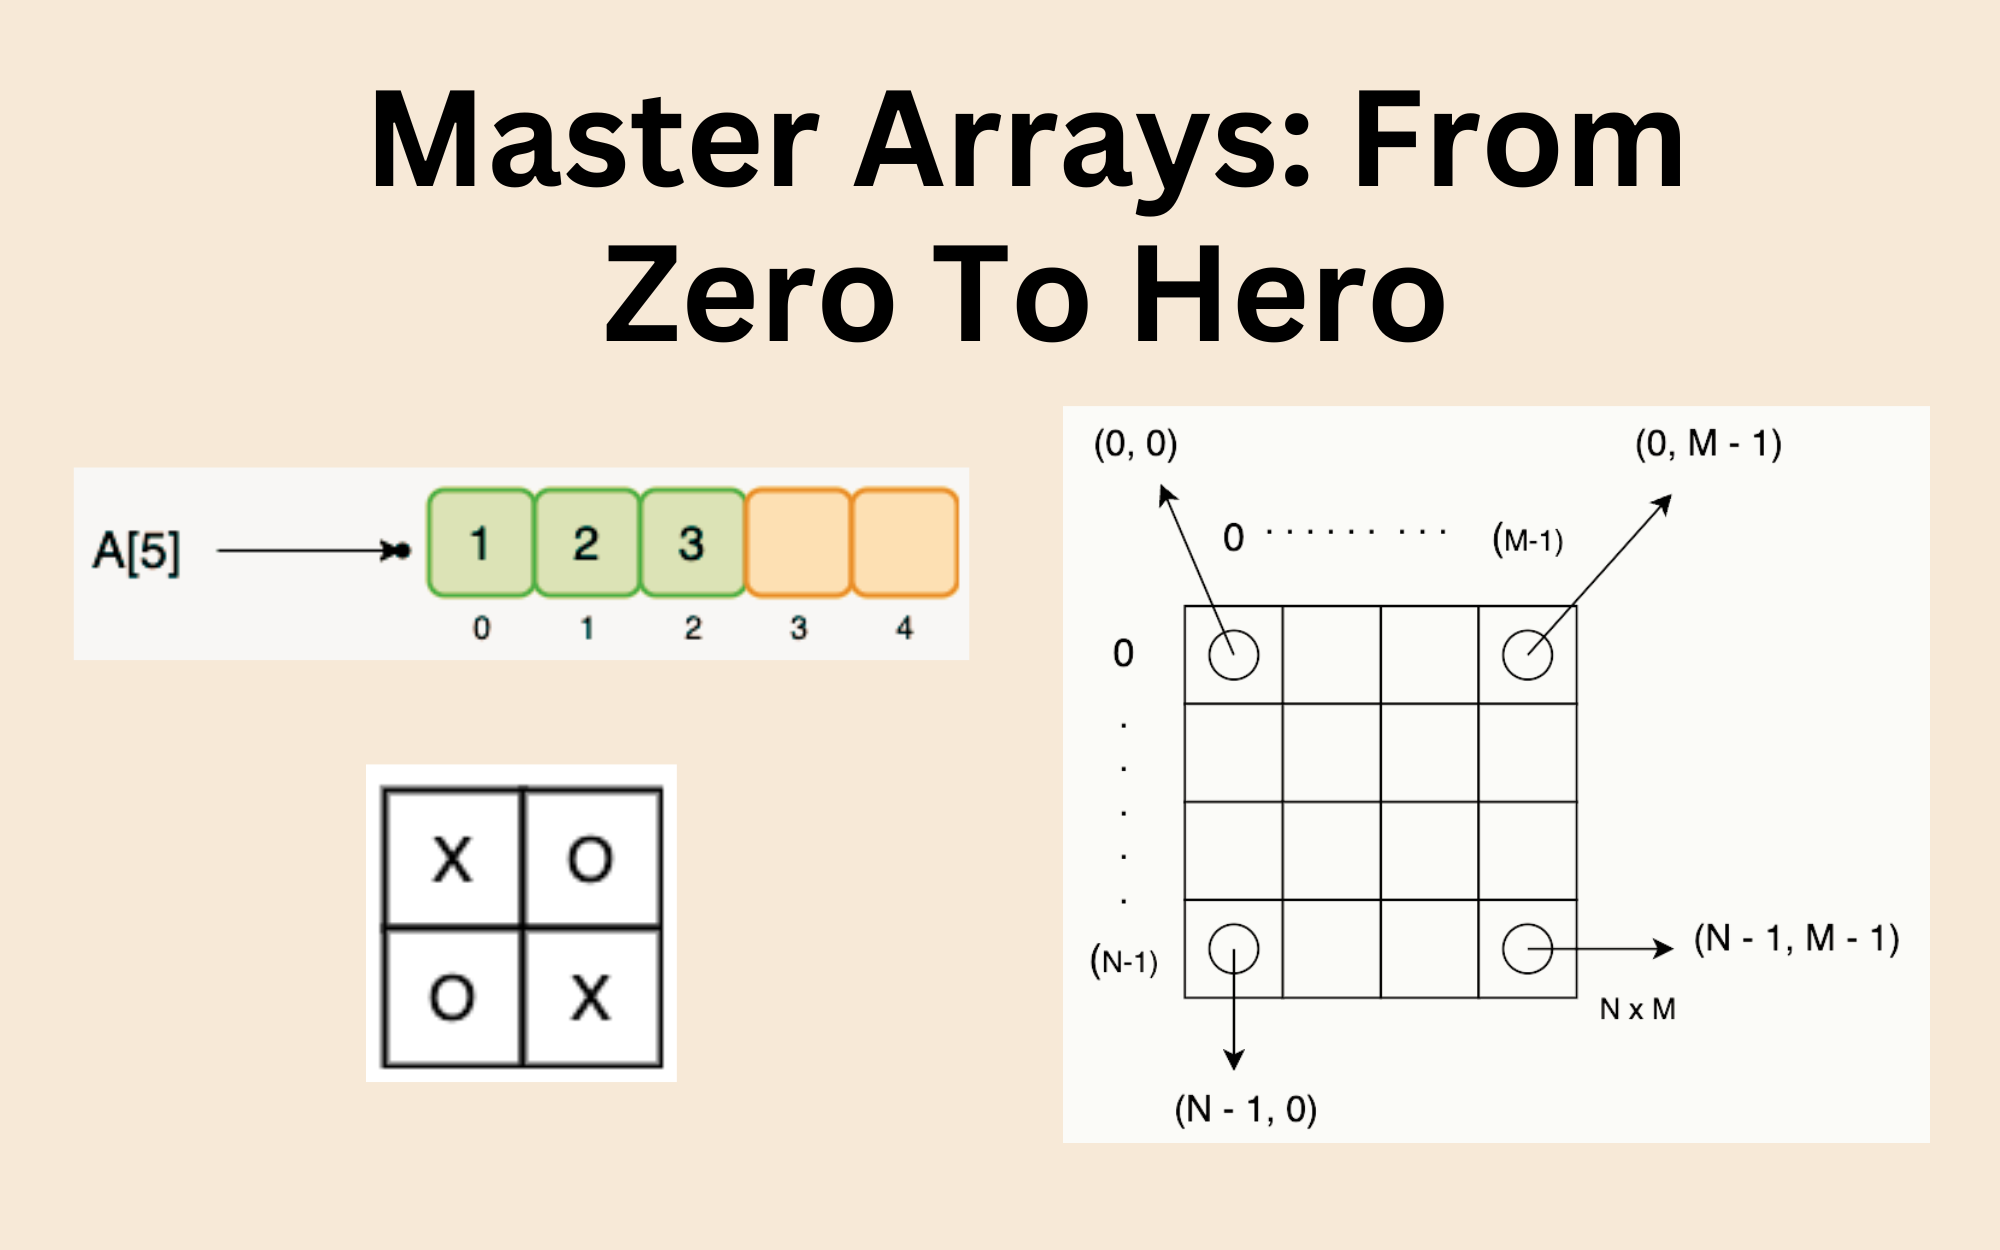 Mastering Arrays For Coding Interviews in Java